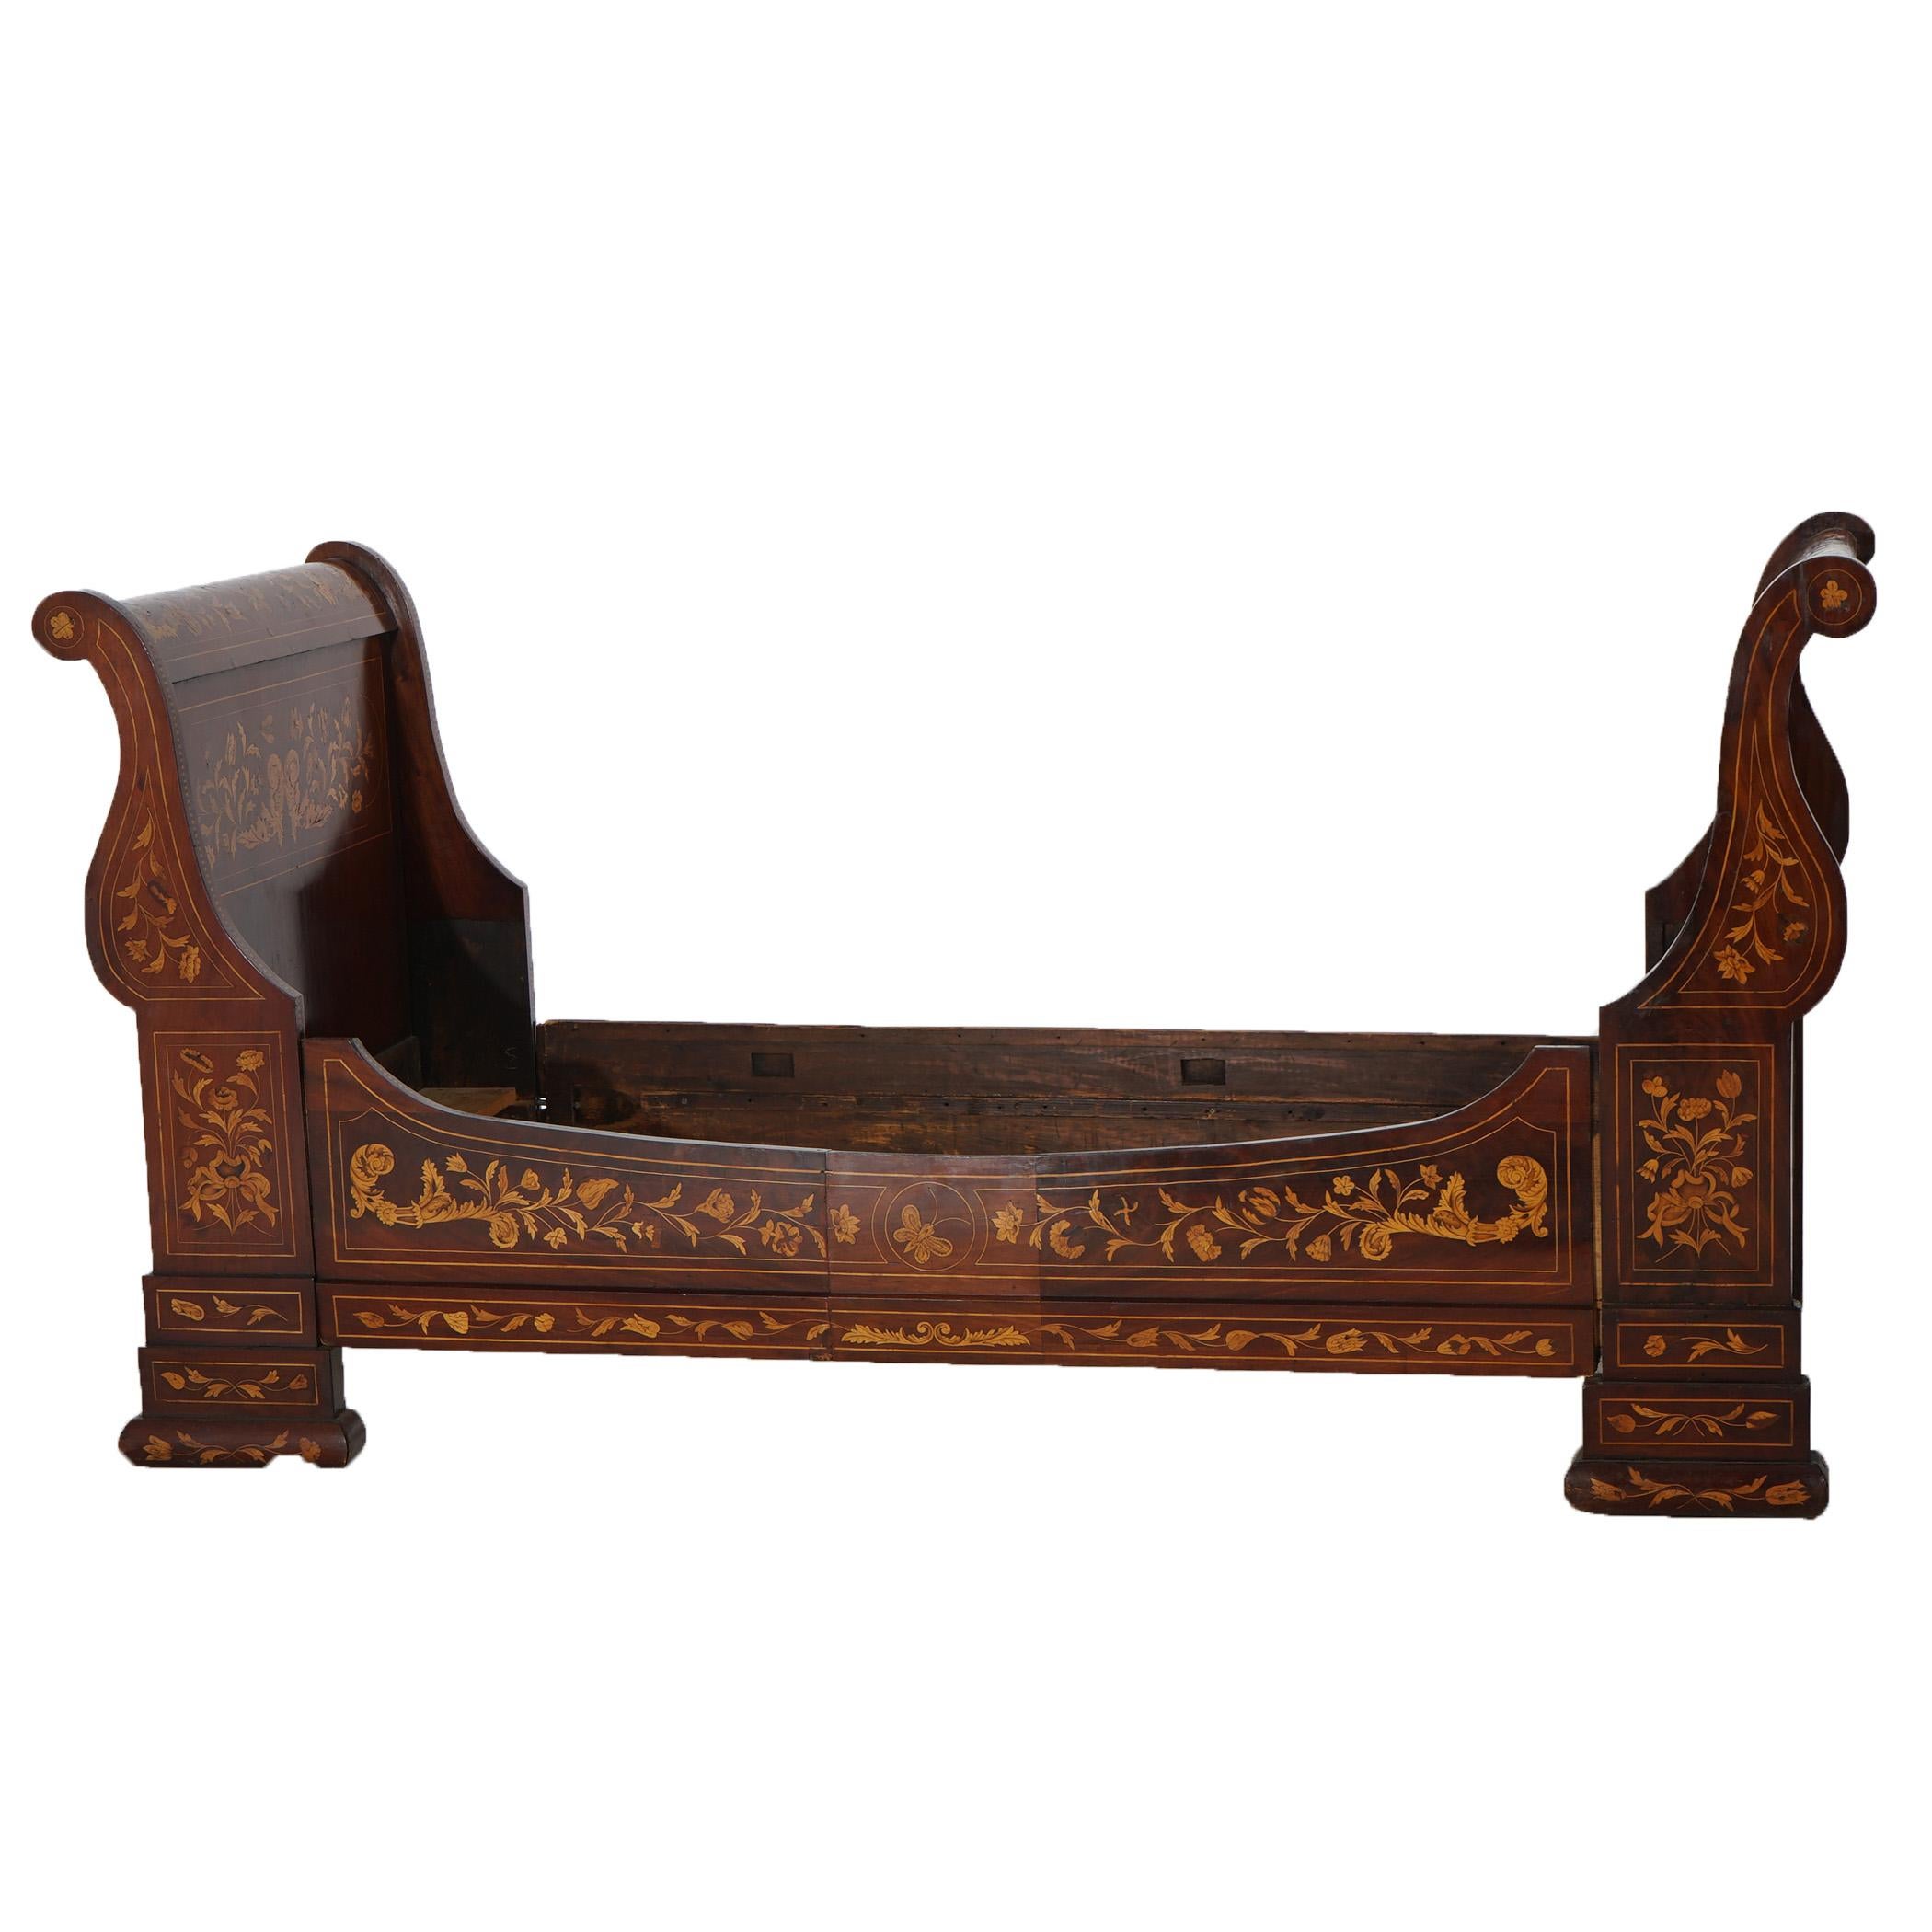 ***Ask About Lower In-House Shipping Rates - Reliable Service & Fully Insured***
An antique youth sleigh bed offers rosewood, mahogany and satinwood floral Dutch marquetry with footboard and headboard in scroll form, c1860

Measures - 44.5